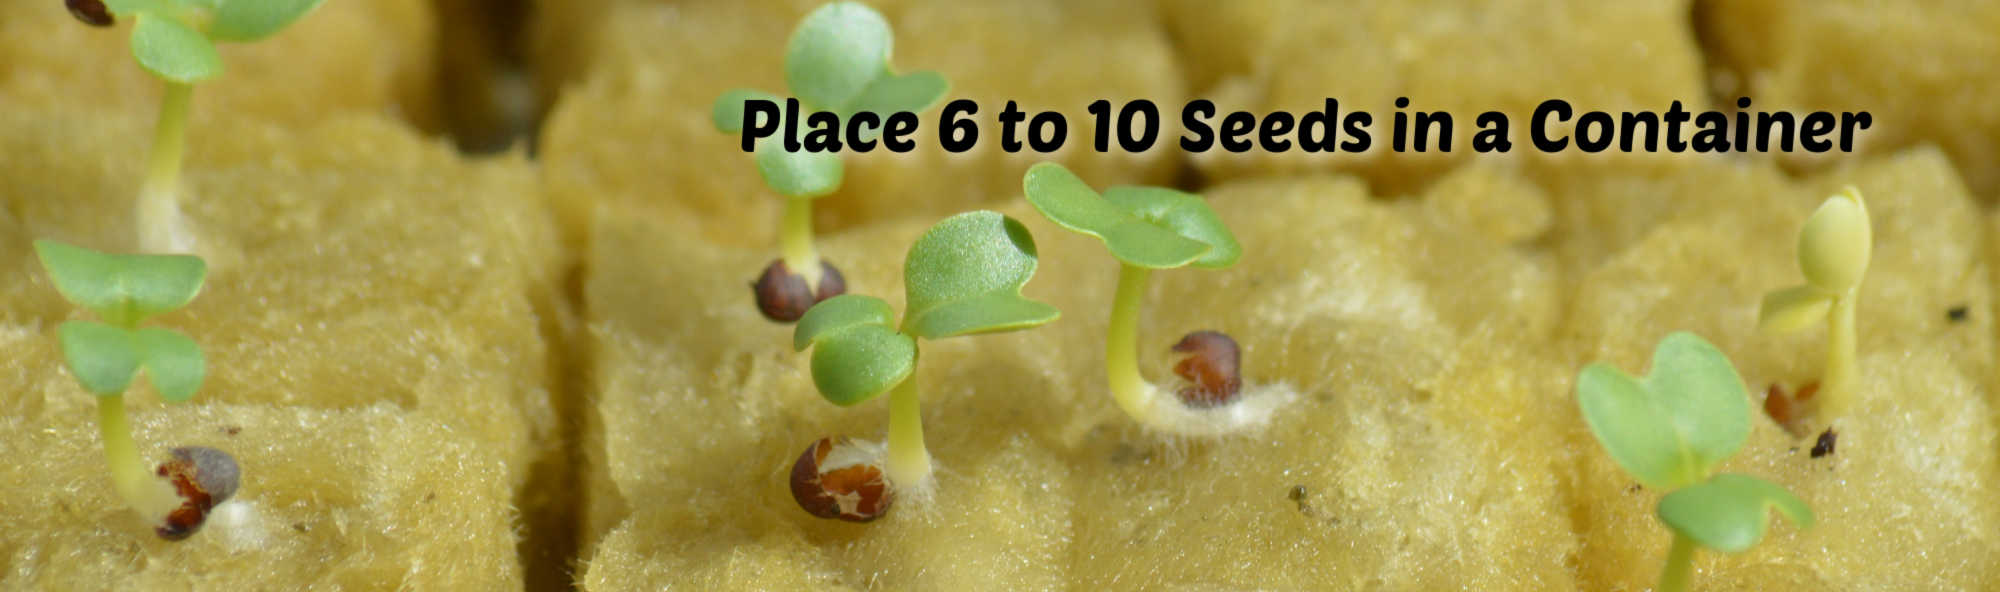 image of place 6 to 10 seeds in a container